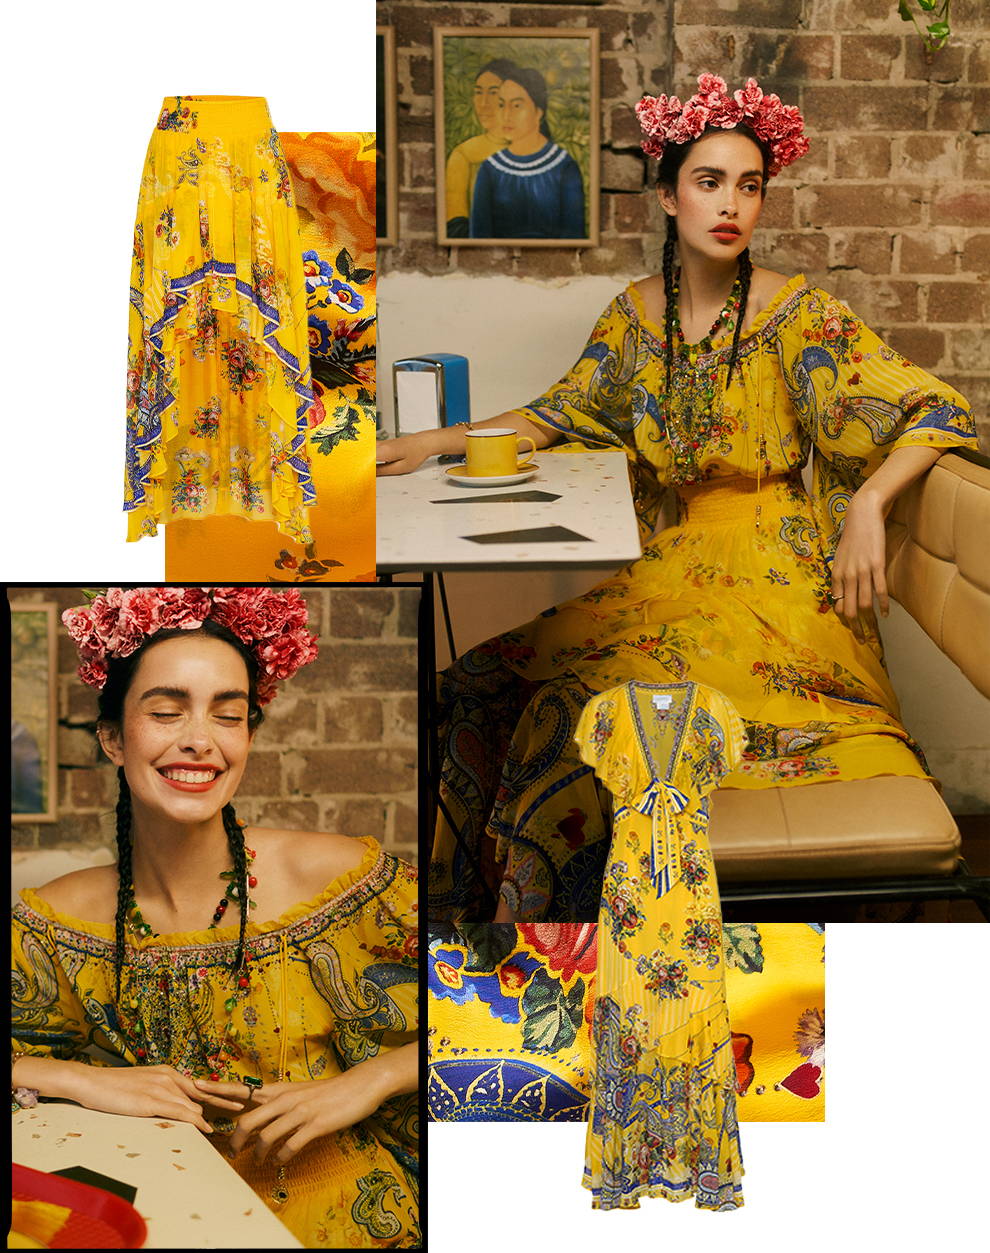 Model in yellow dress with bright florals and paisleys